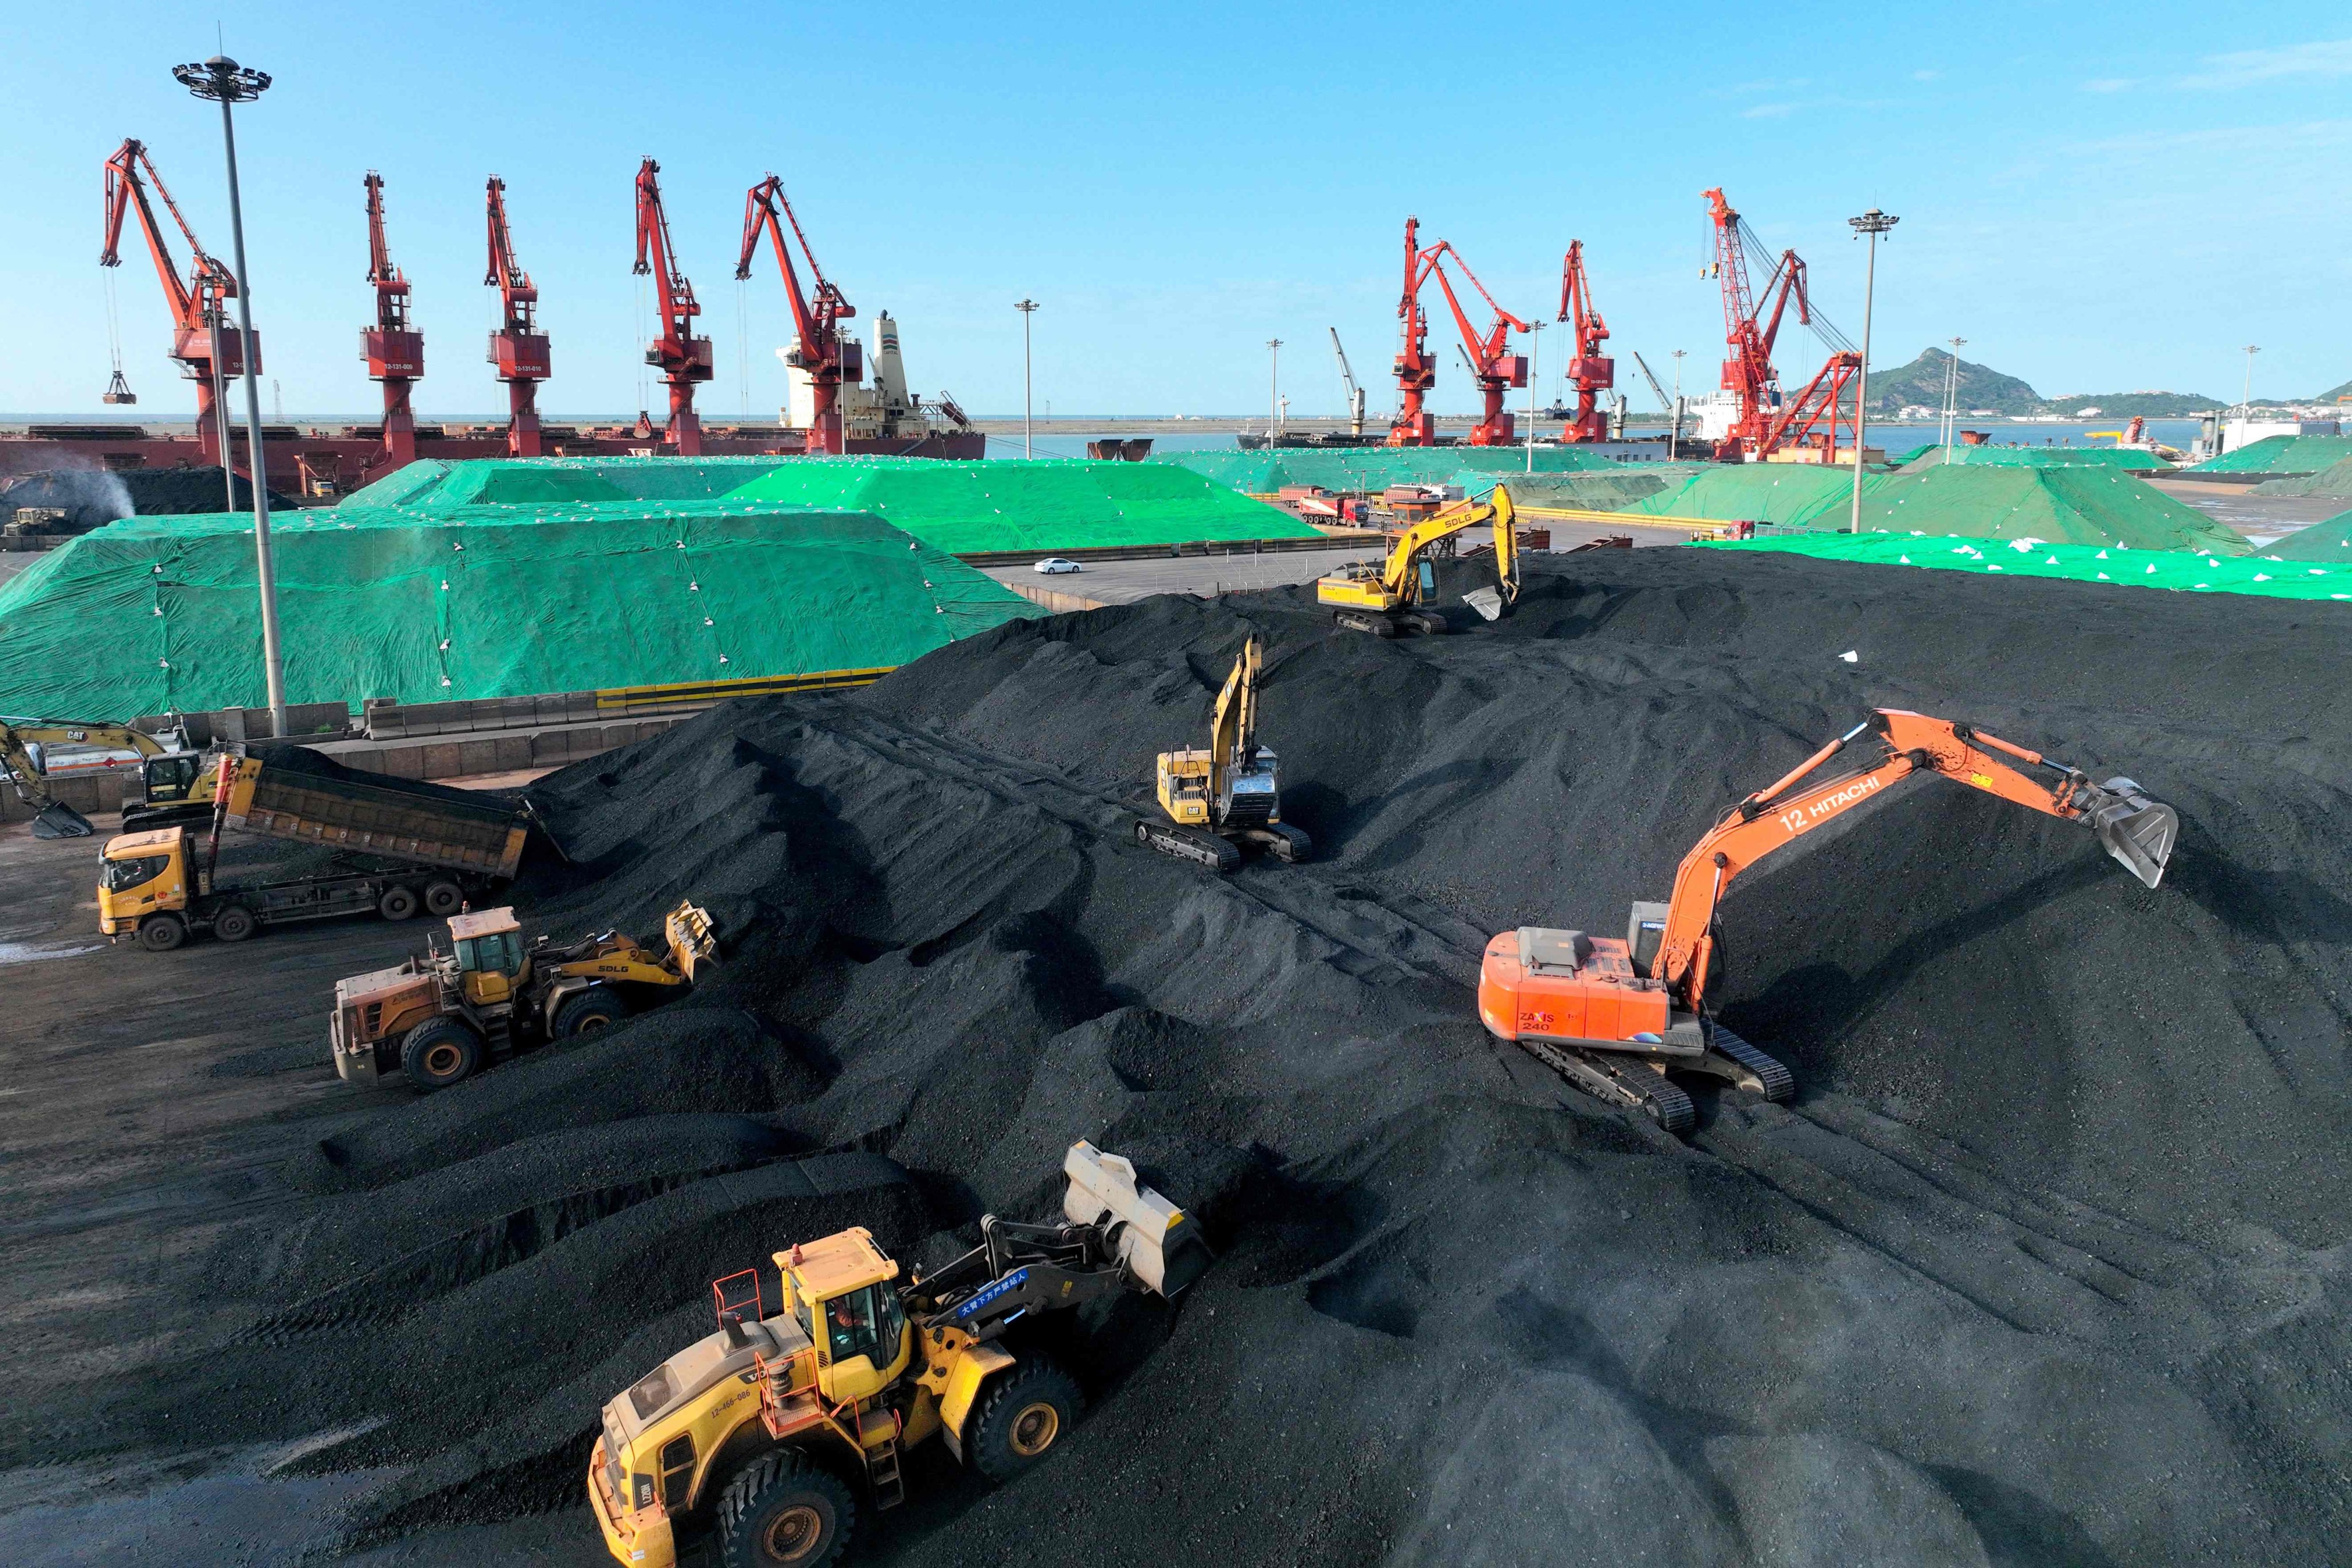 Excavators transfer coal at a port in China’s Jiangsu province. The country has ramped up coal power supplies since the hydropower crisis in Sichuan province last summer. Photo: AFP